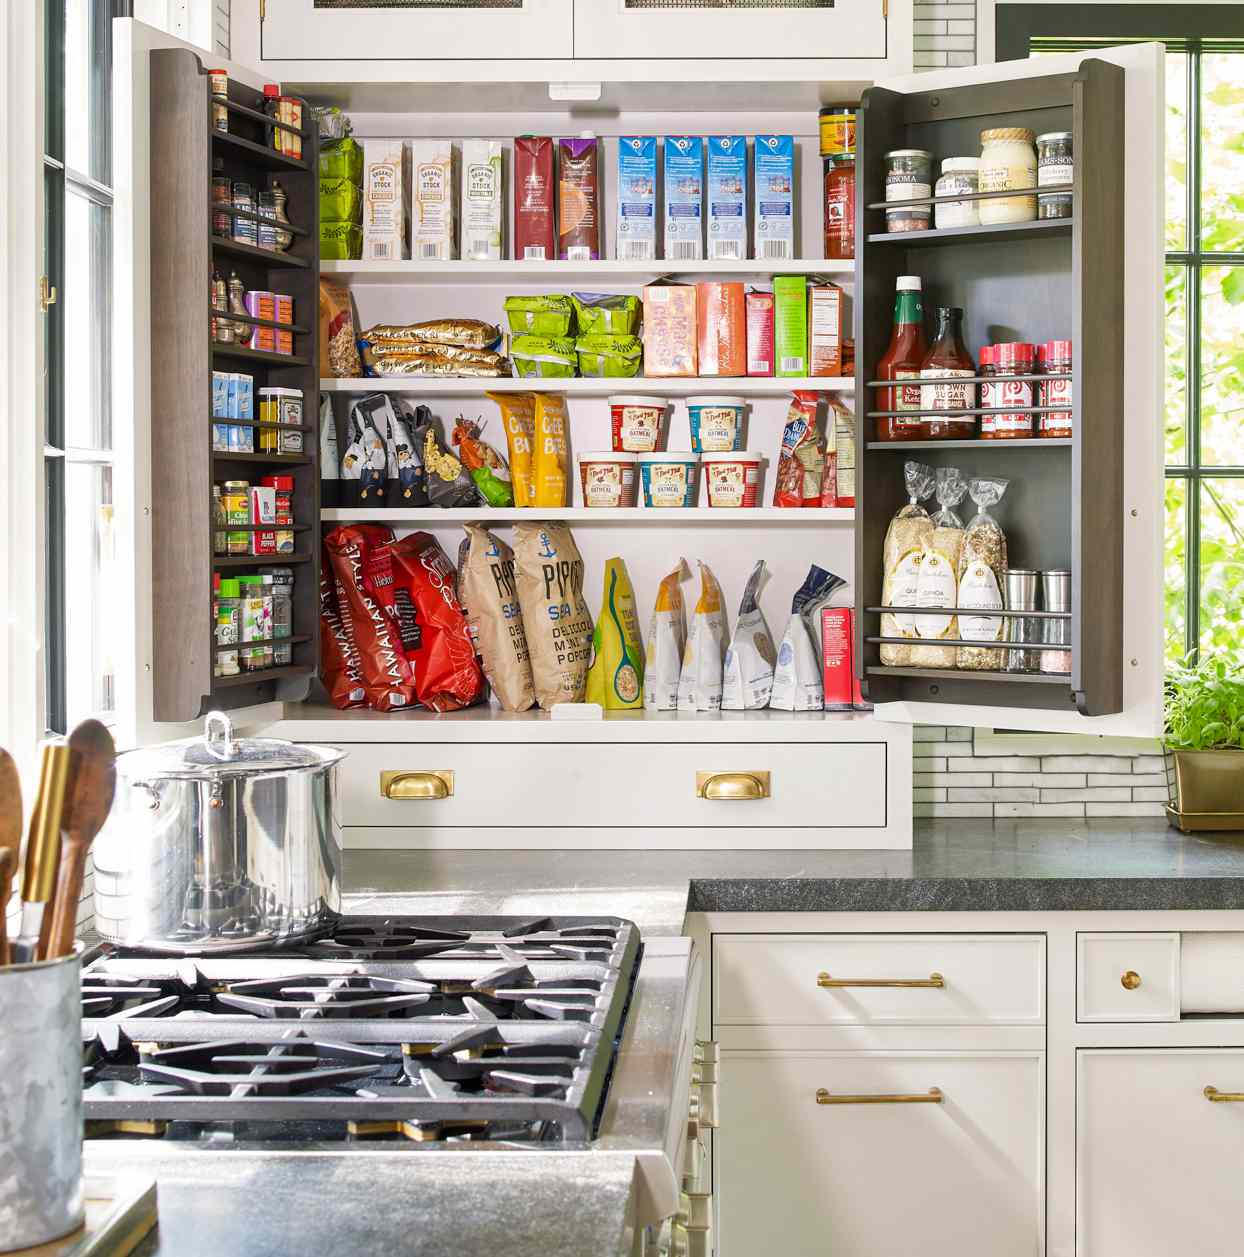 18 Brilliant Ideas for Organizing Kitchen Cabinets   Better Homes ...